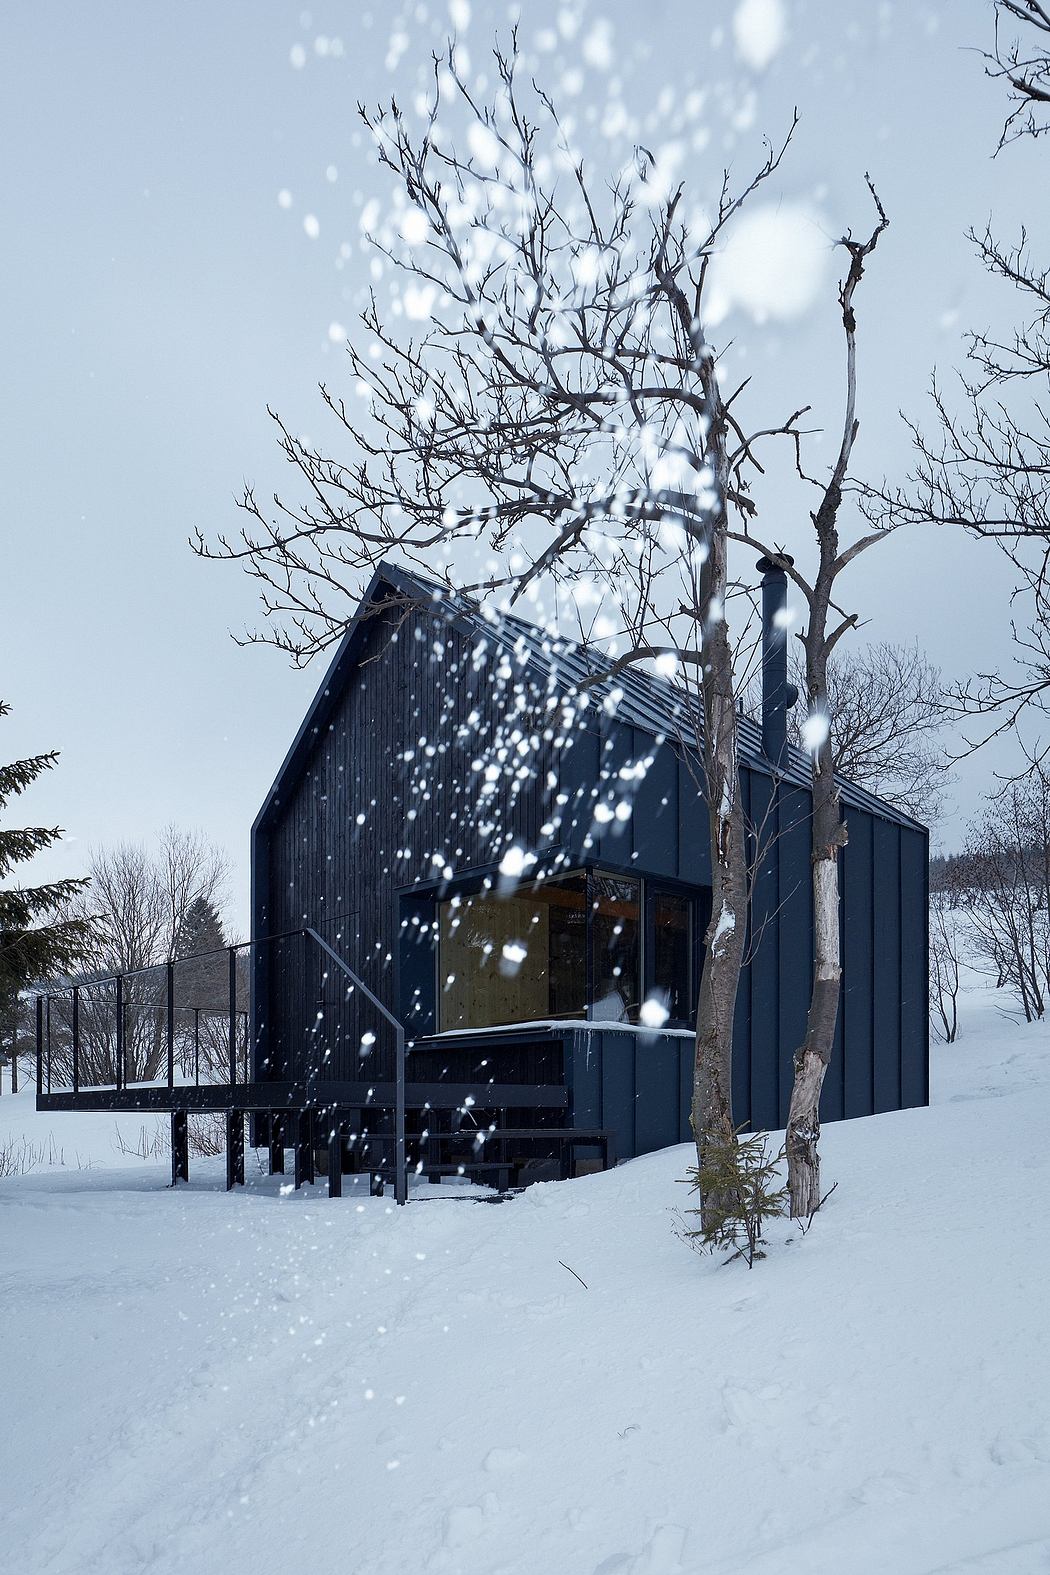 A modern, black cabin nestled in a snowy landscape, with bare trees and snowfall creating a peaceful scene.